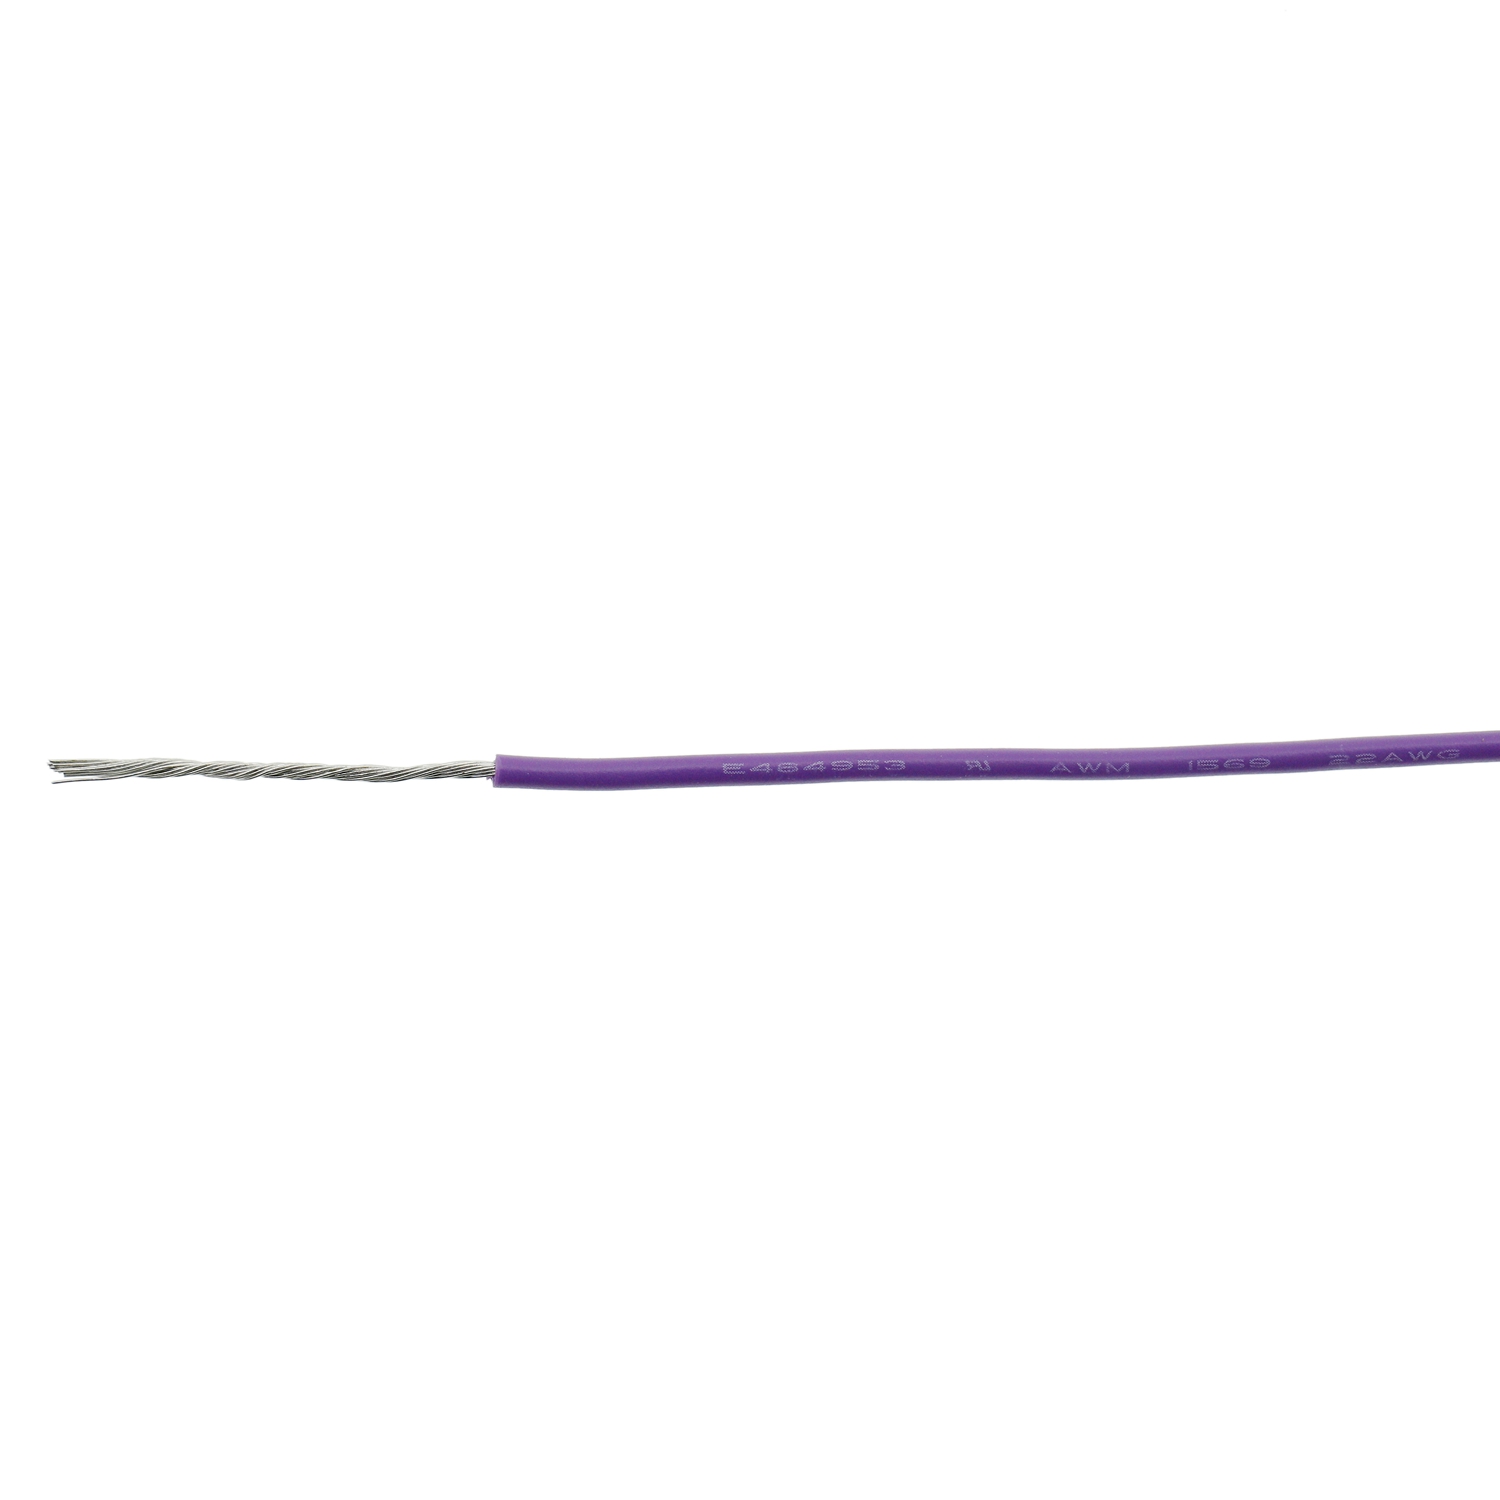 UL1569 Hookup Wire 22AWG for Internal Wiring of Appliance 